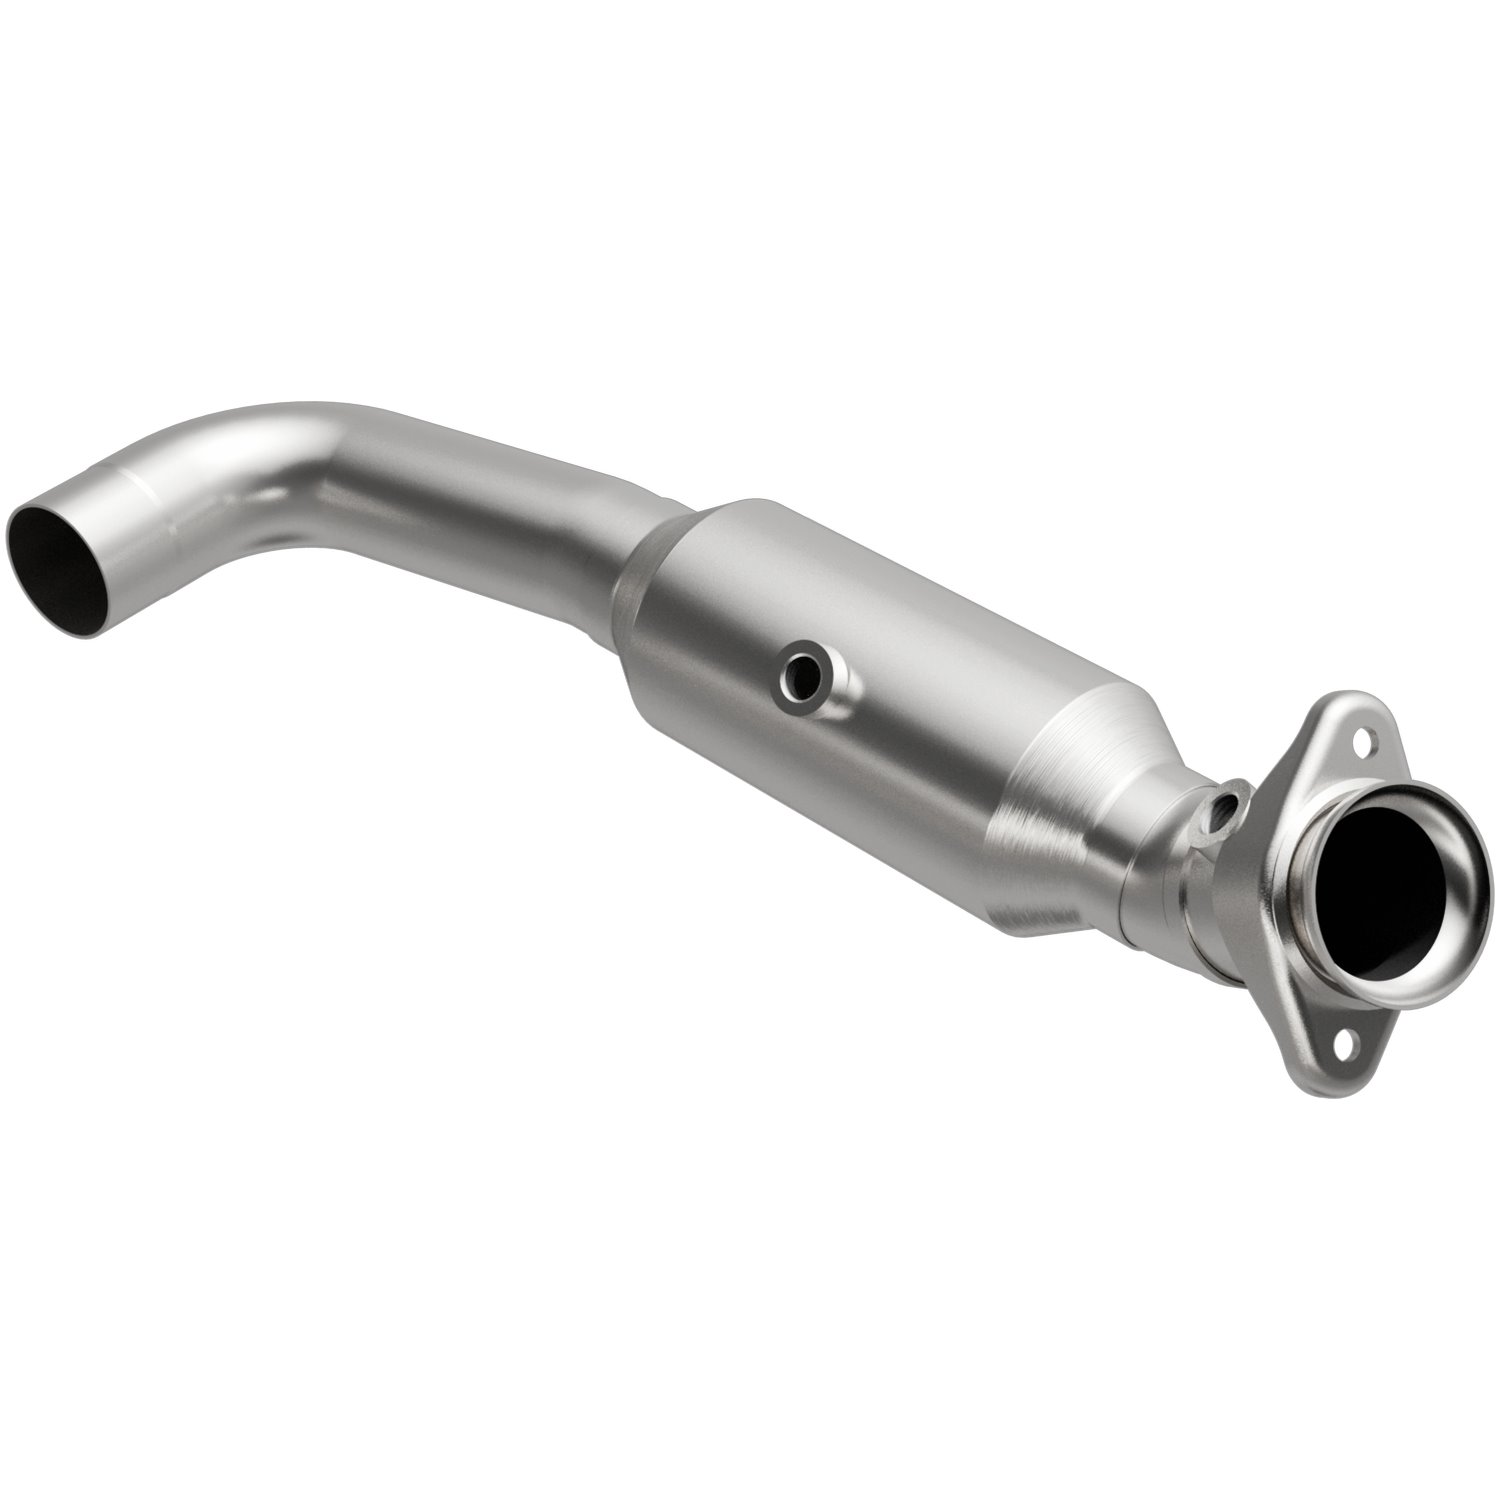 2015-2020 Ford F-150 OEM Grade Federal / EPA Compliant Direct-Fit Catalytic Converter 21-467